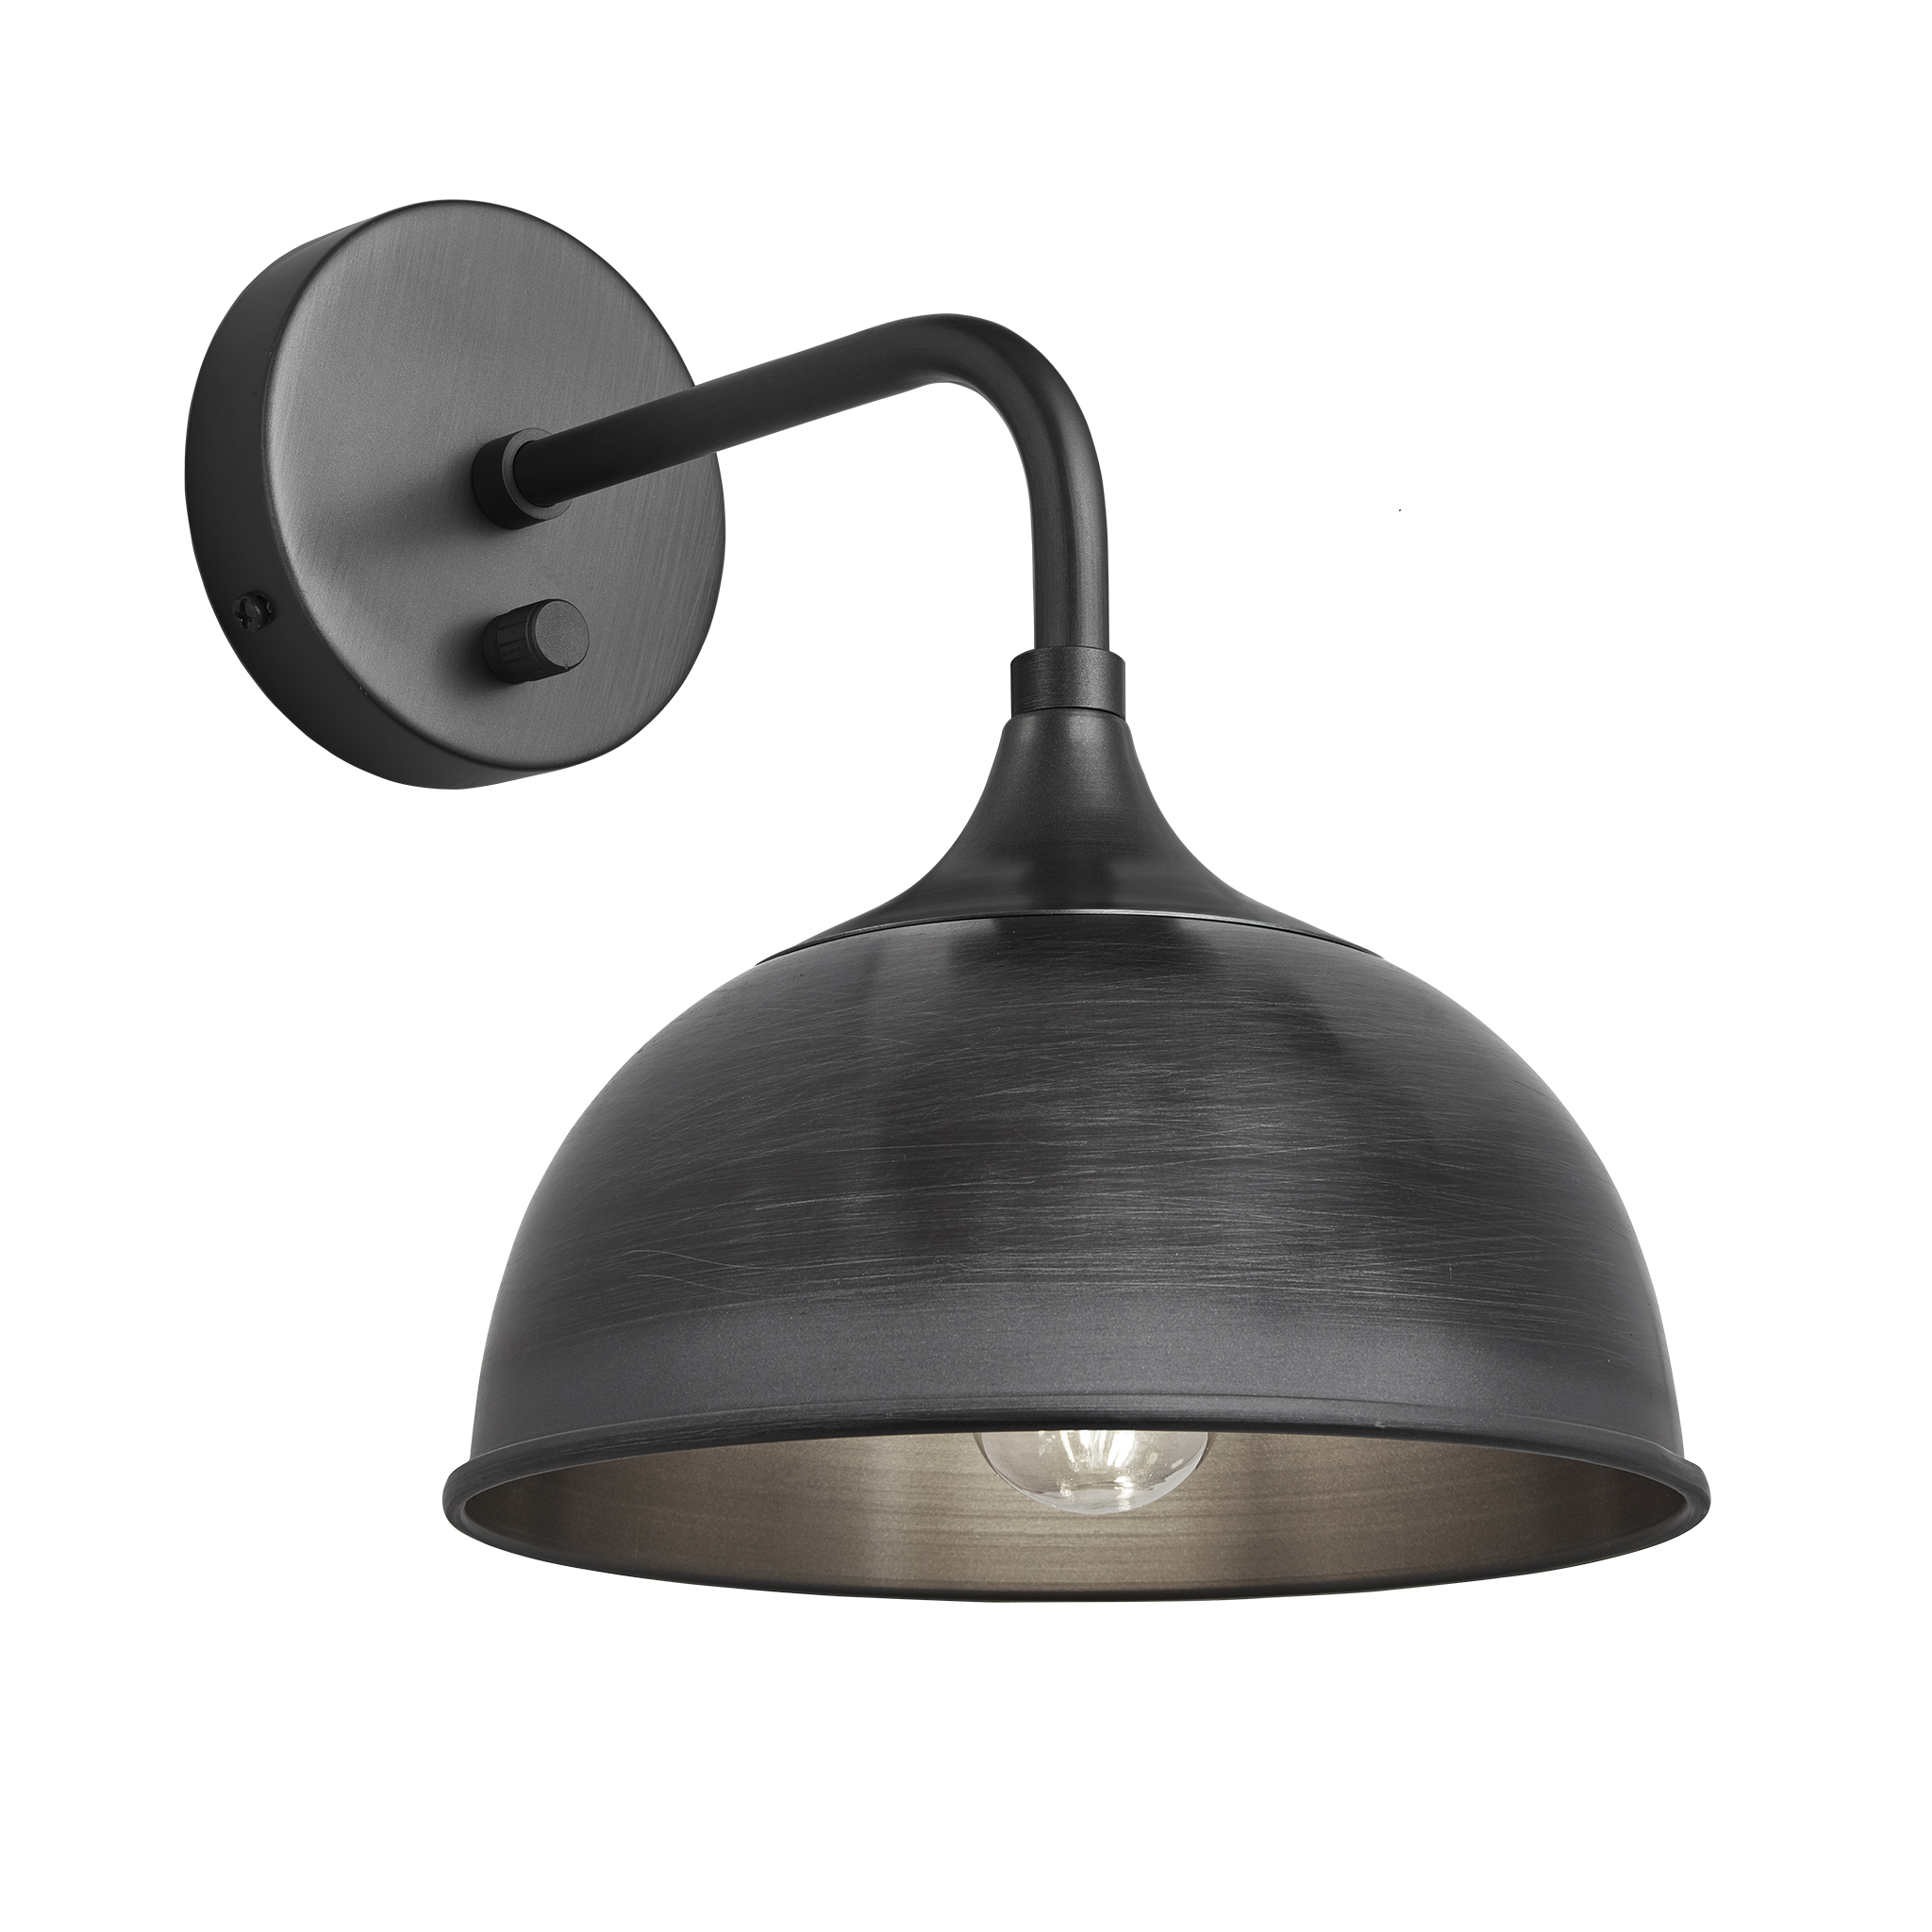 Chelsea Dome Wall Light - 8 Inch - Pewter - Pewter Holder